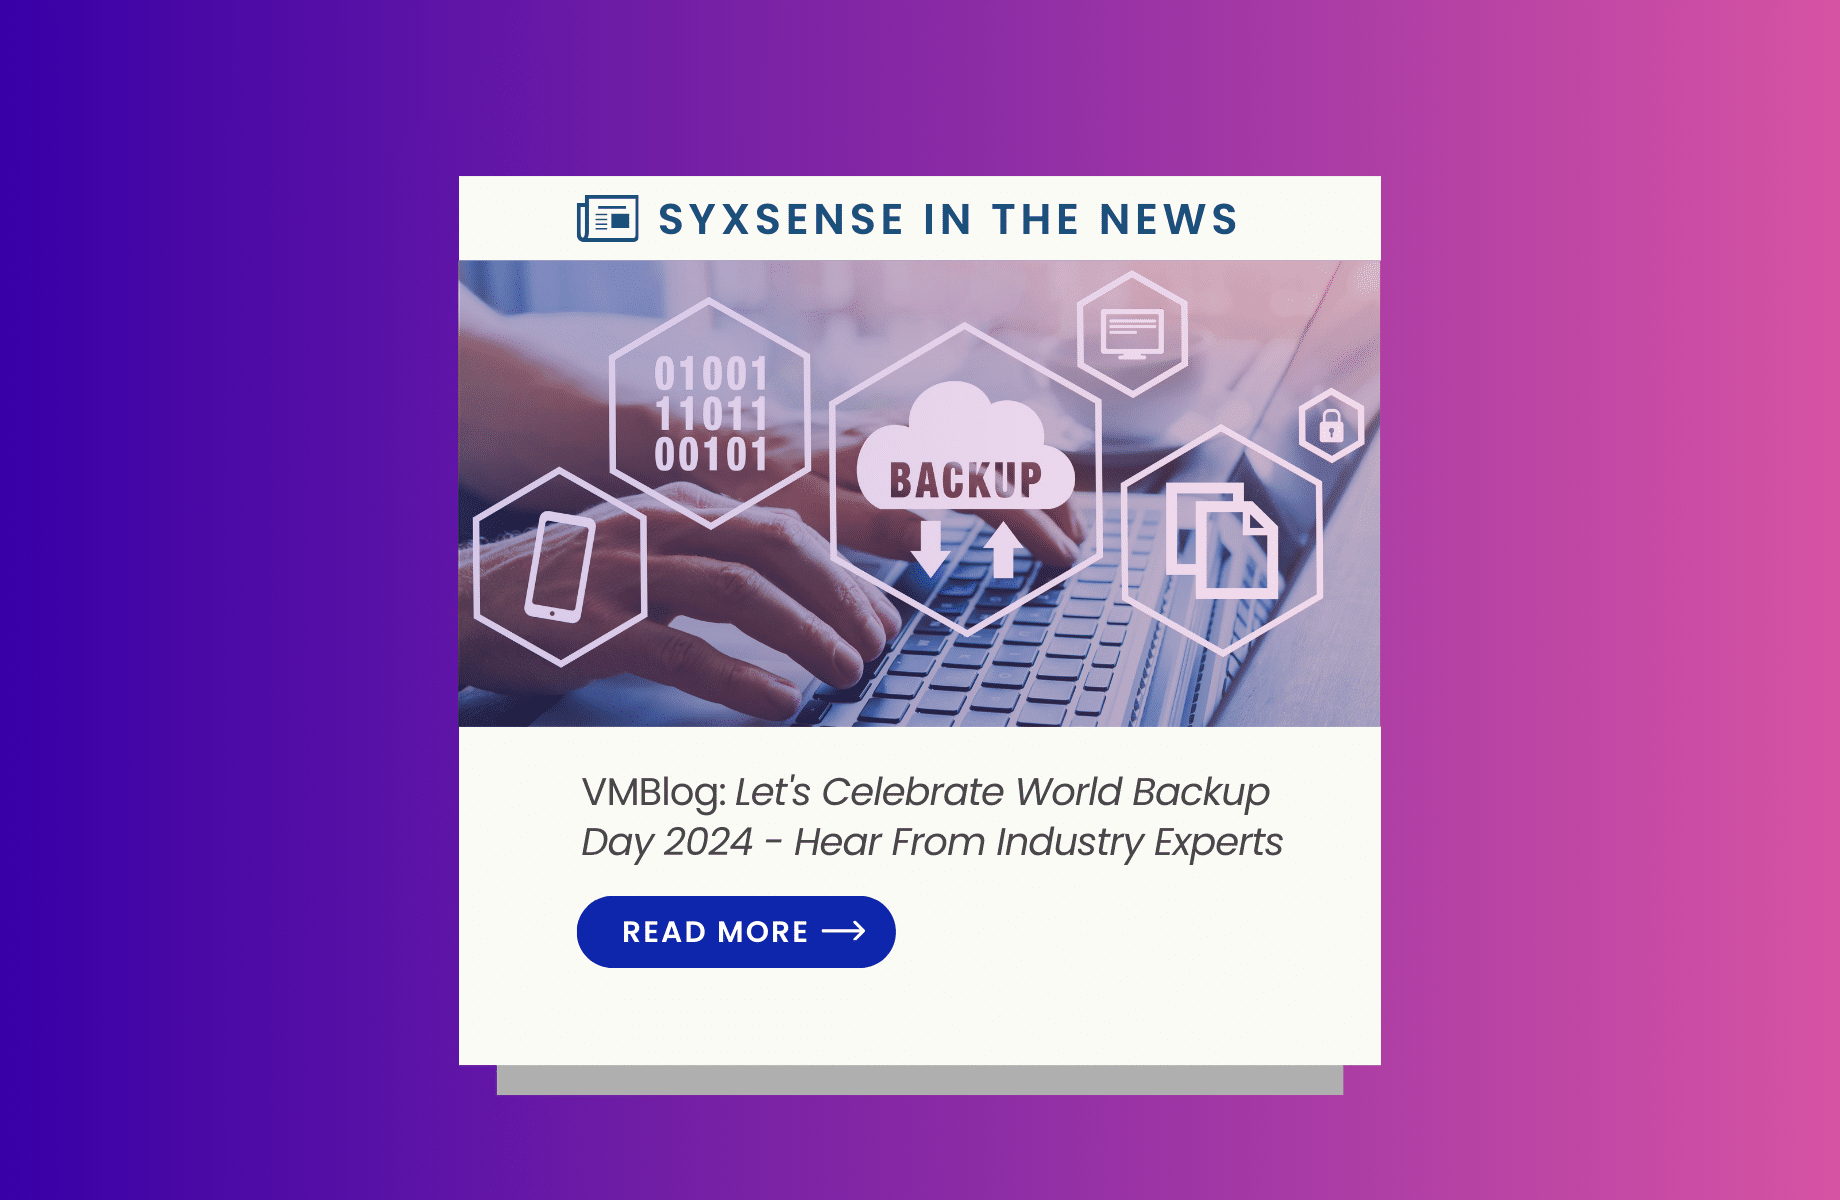 Syxsense in the news at VMBlog